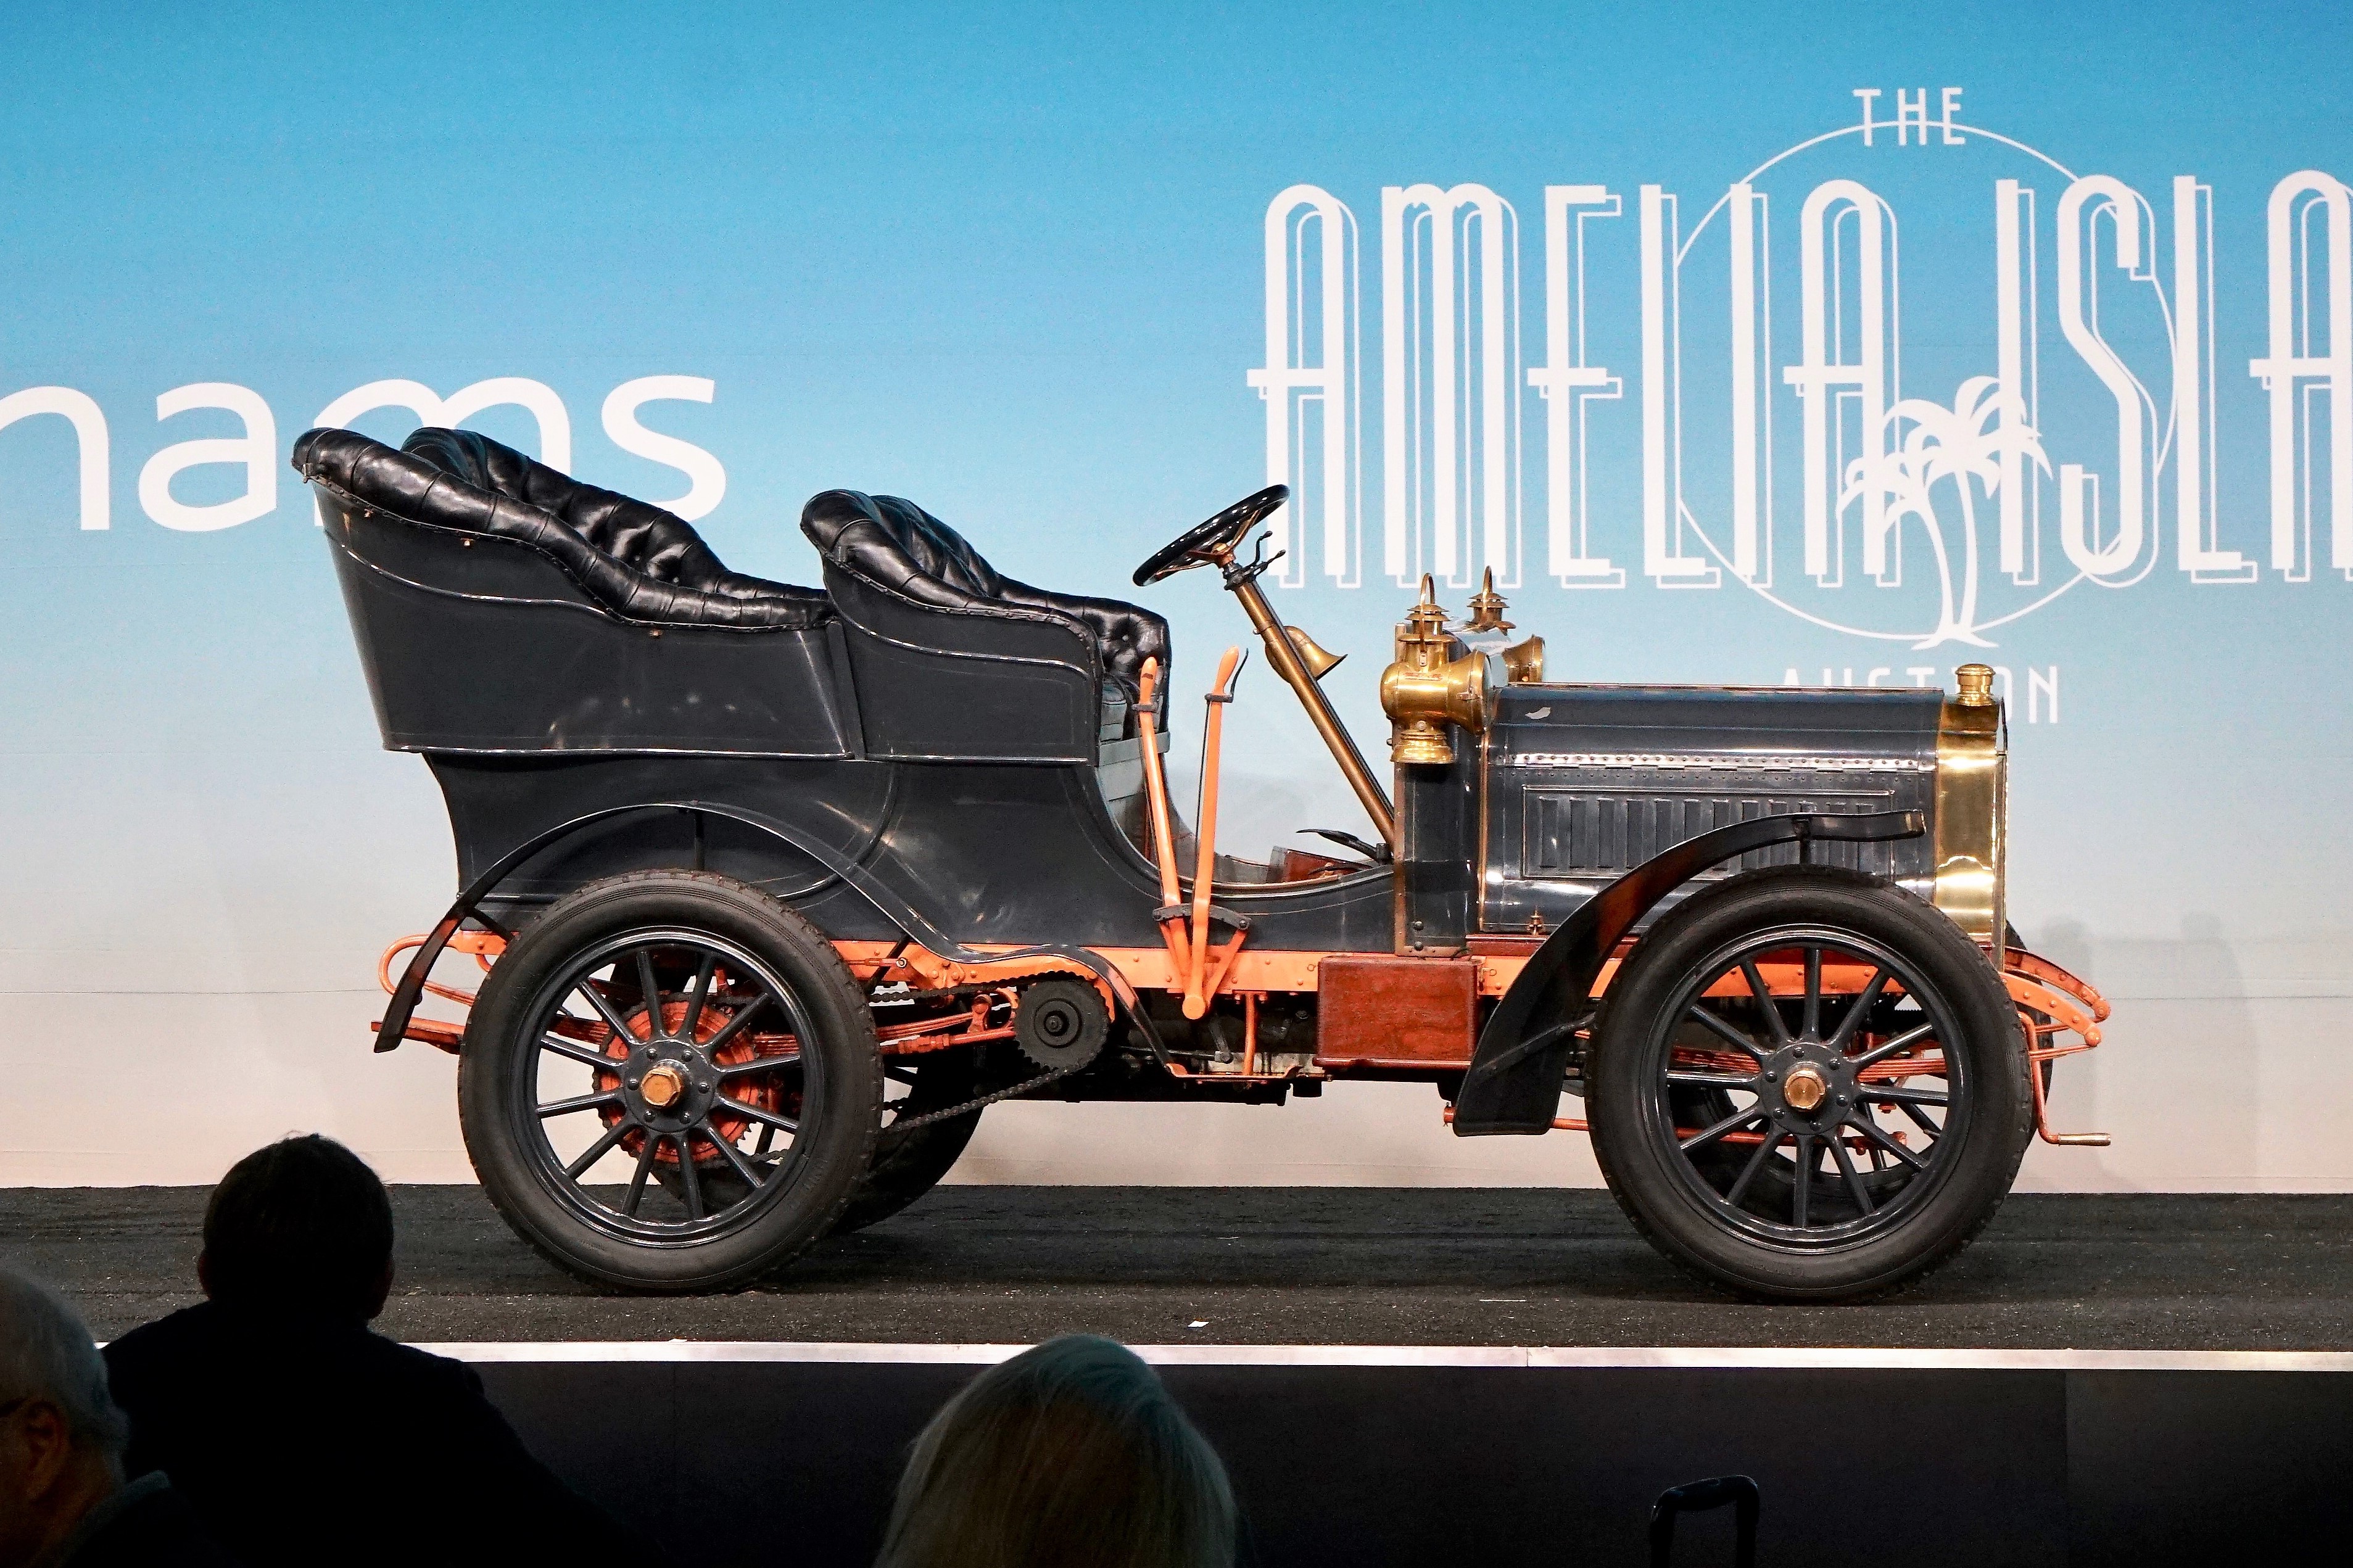 Amelia Island, Big brass era collection highlights opening day at Amelia auctions, ClassicCars.com Journal